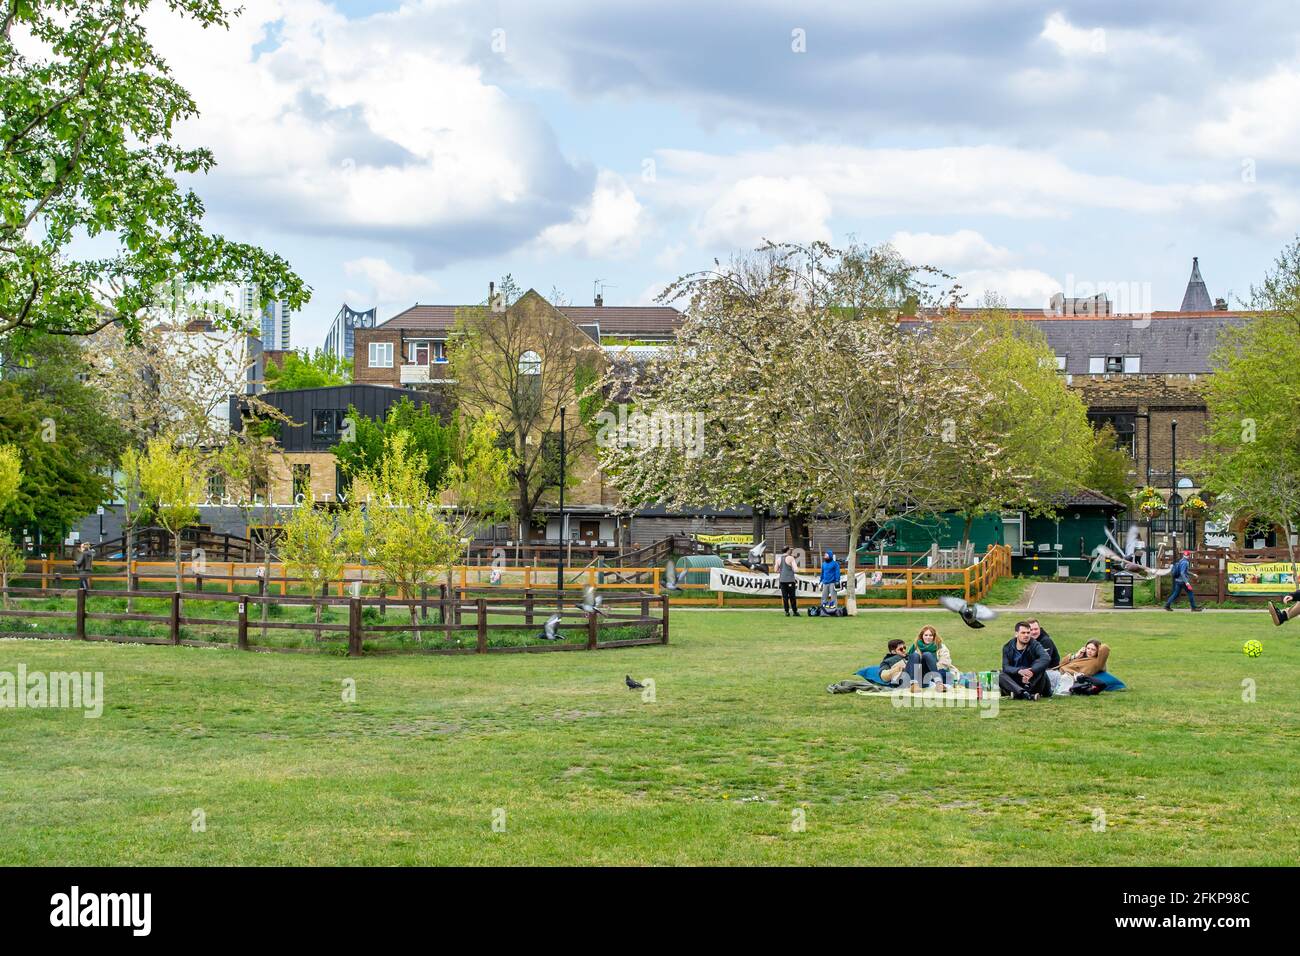 VAUXHALL, LONDON, ENGLAND- 1 May 2021: Vauxhall City Farm photographed from the grass of Vauxhall Pleasure Gardens Stock Photo